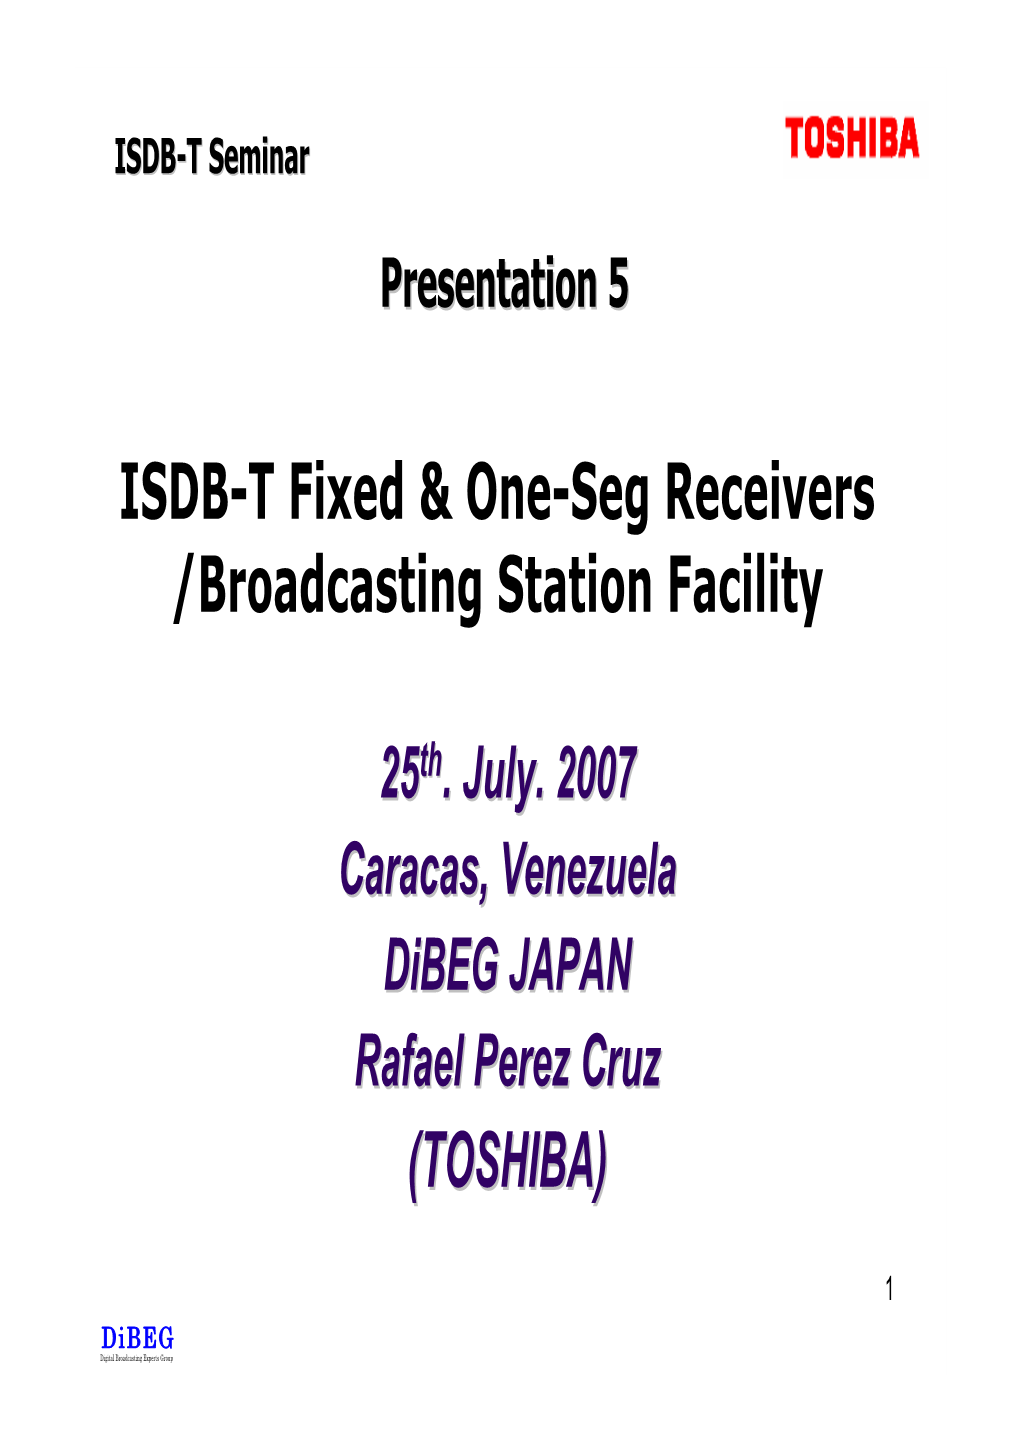 ISDB-T Fixed & One-Seg Receivers /Broadcasting Station Facility